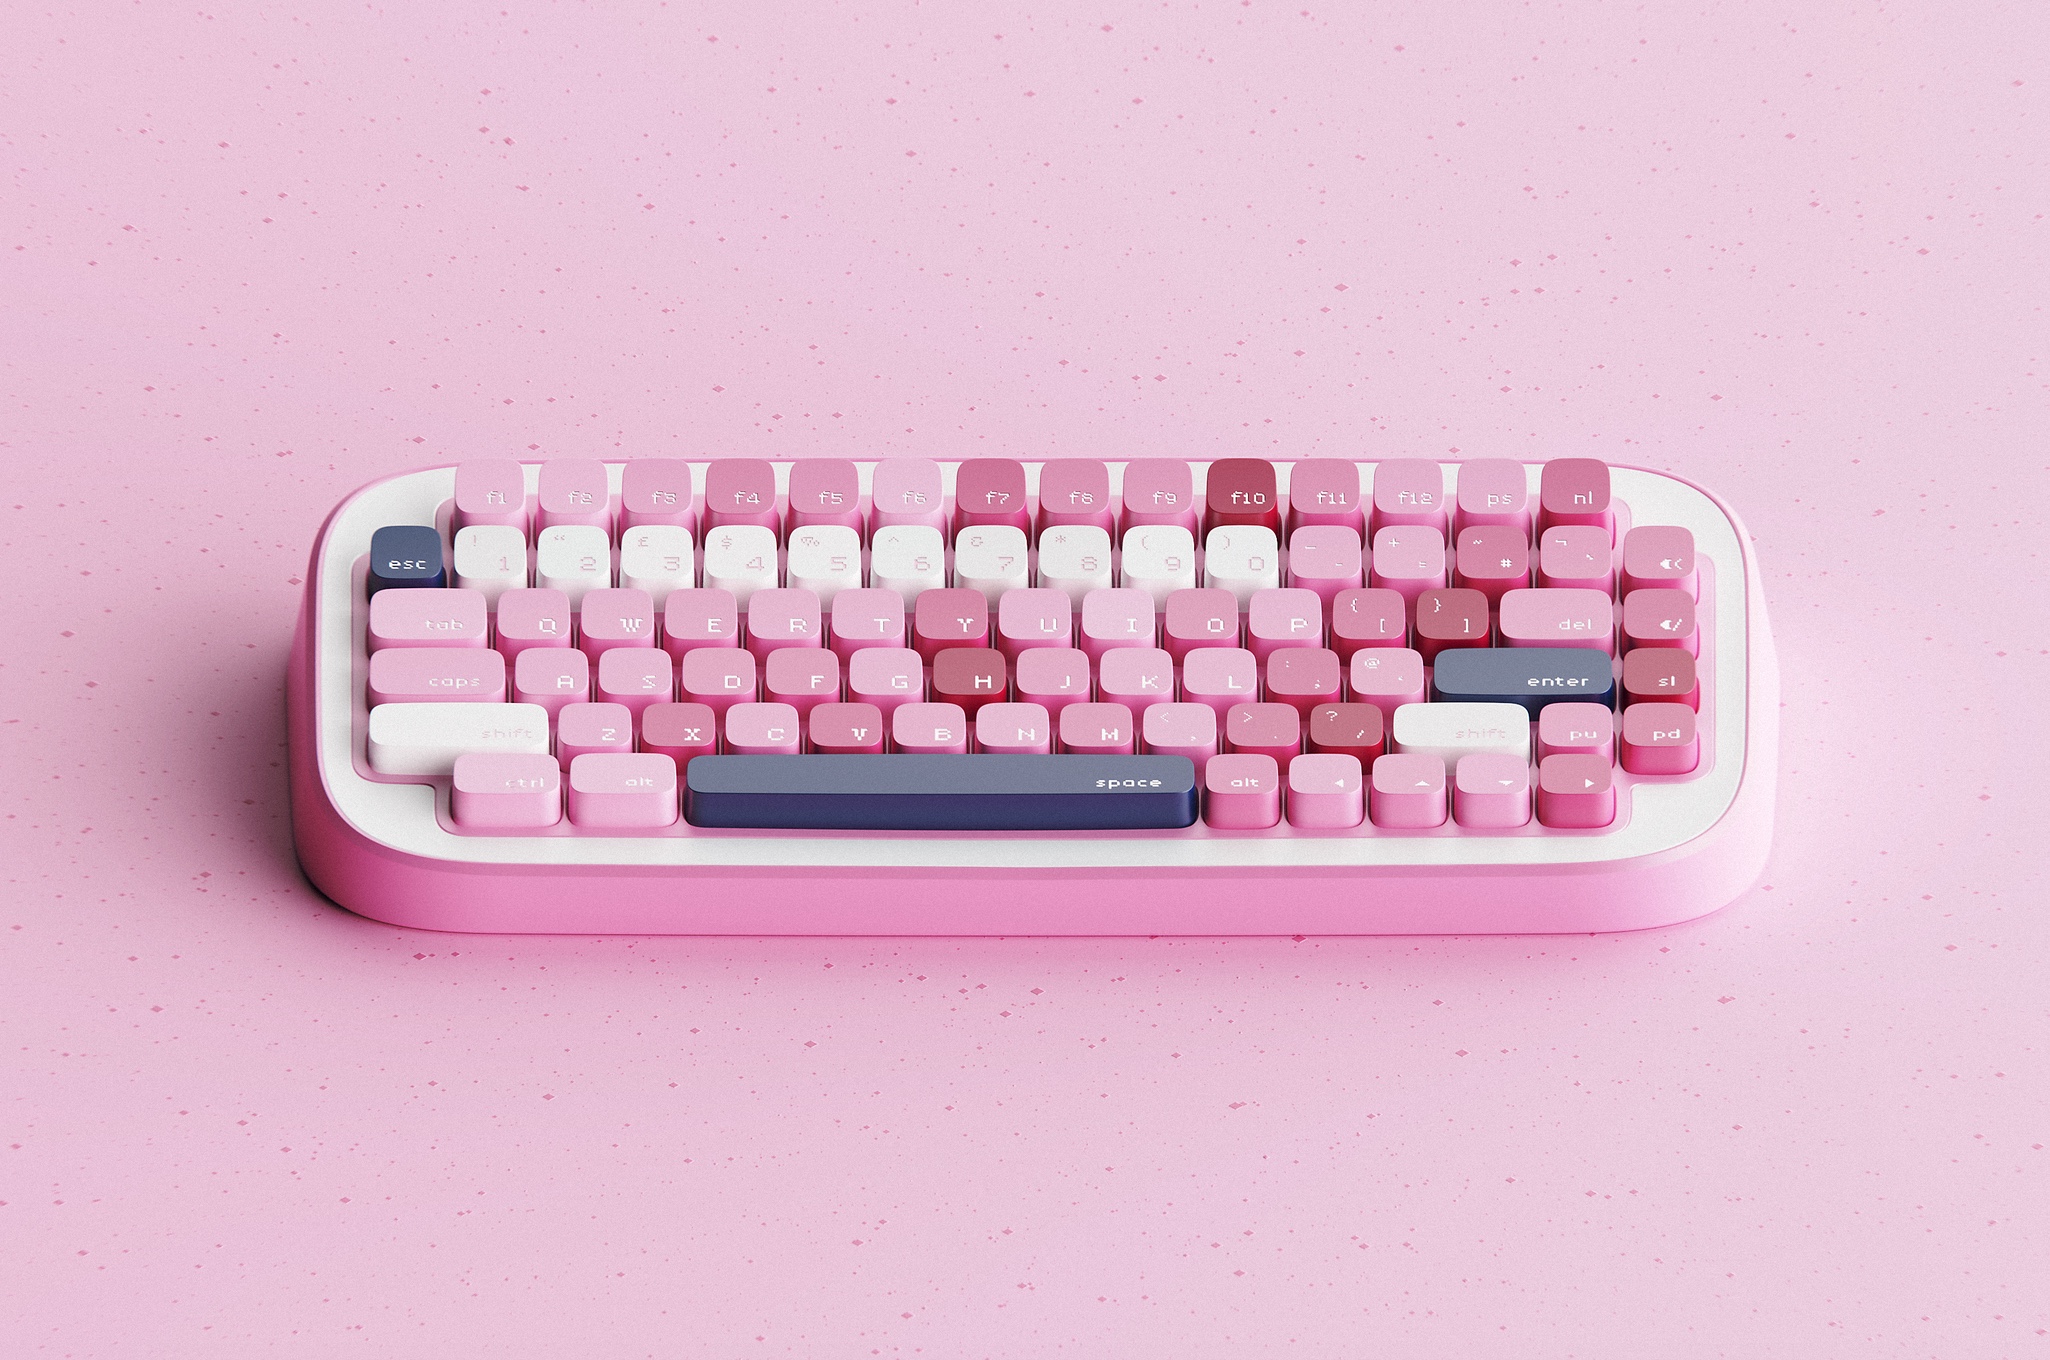 Cool Keyboard Concept